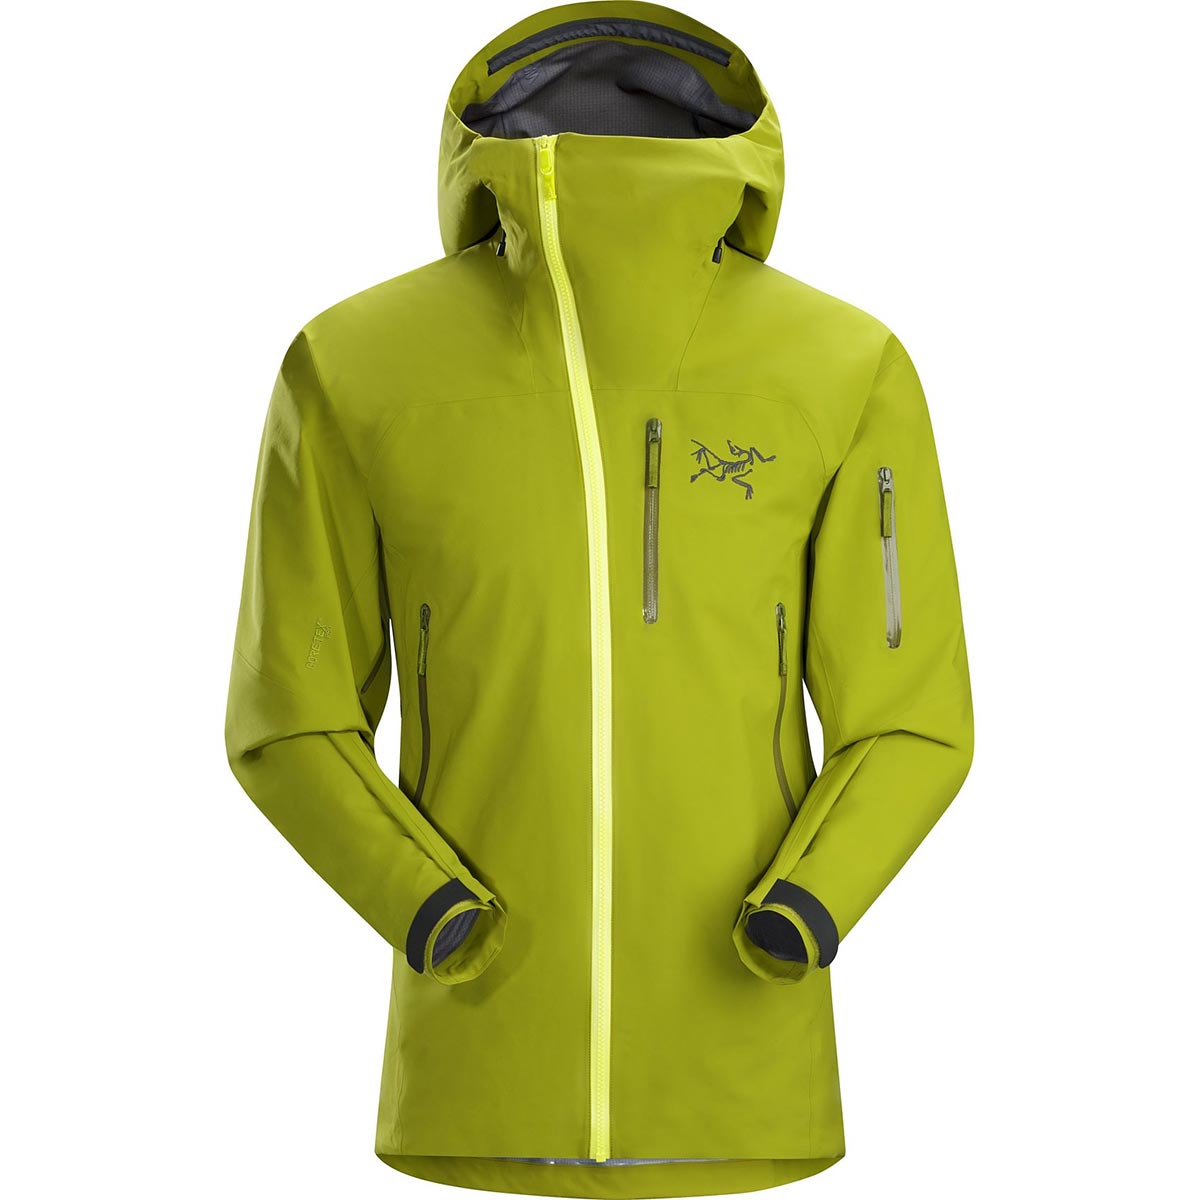 Arc'teryx Sidewinder Jacket, men's, discontinued Fall 2018 colors